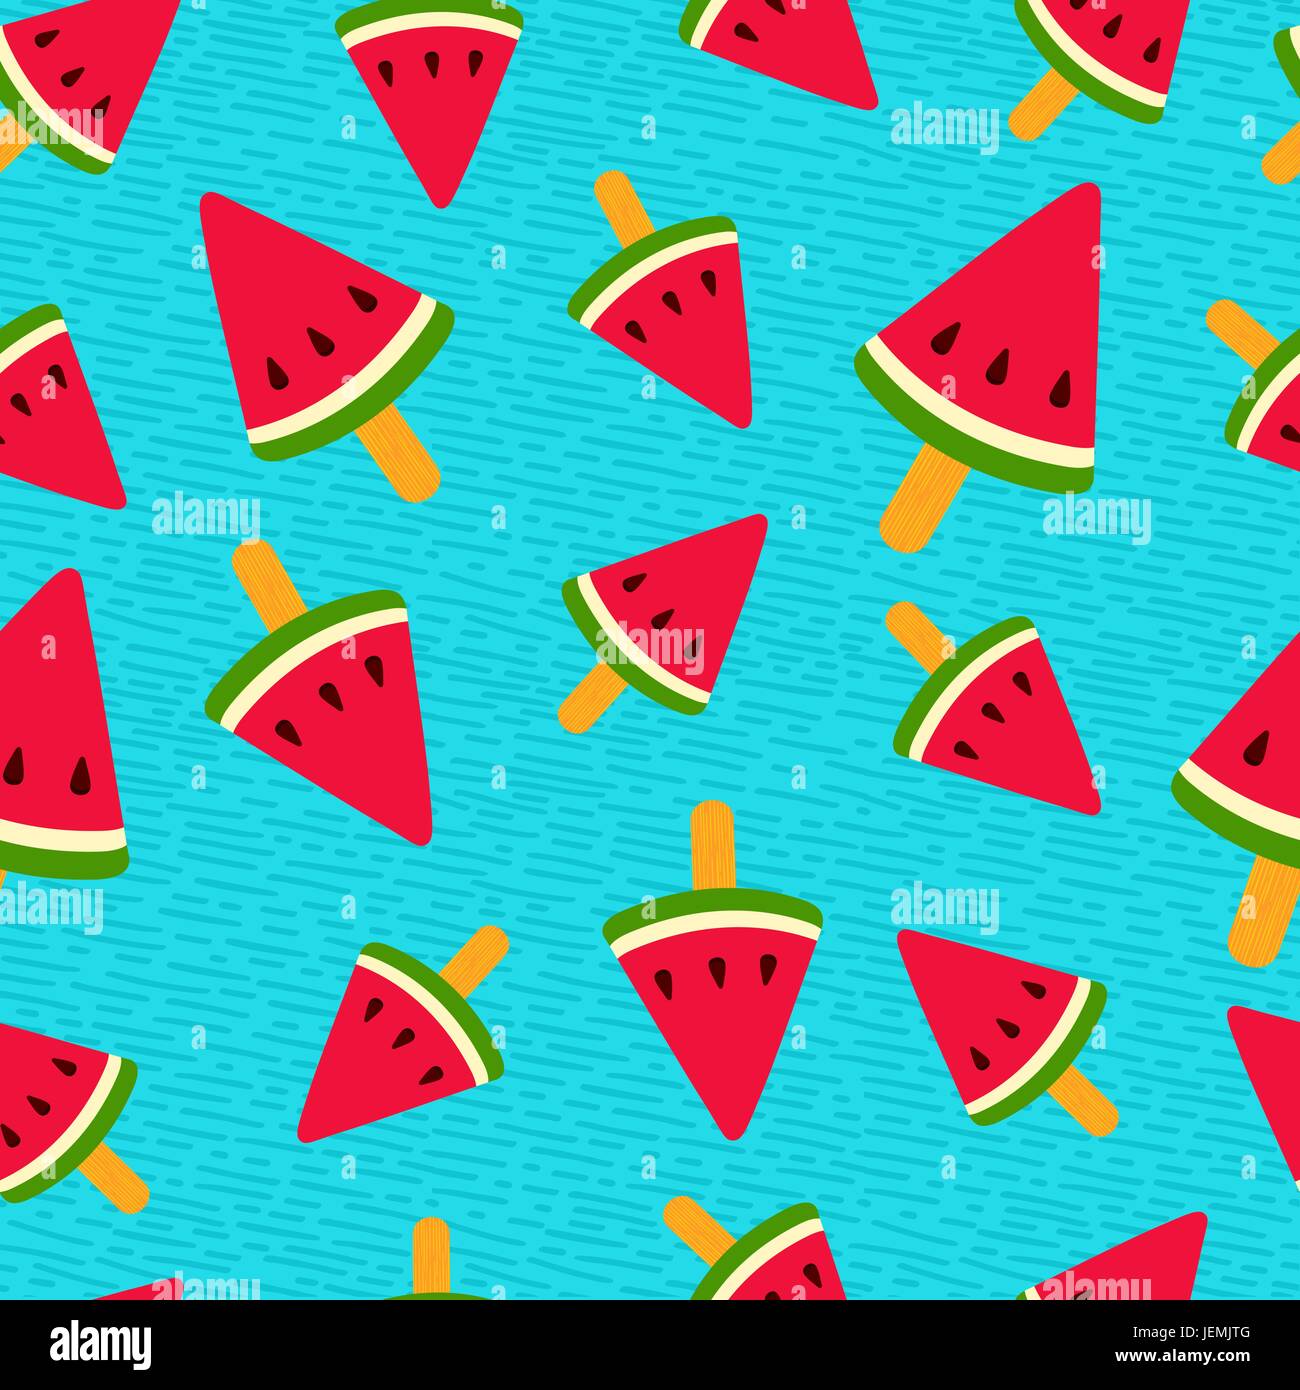 Summer seamless pattern design with watermelon ice cream art, colorful season background. EPS10 vector. Stock Vector